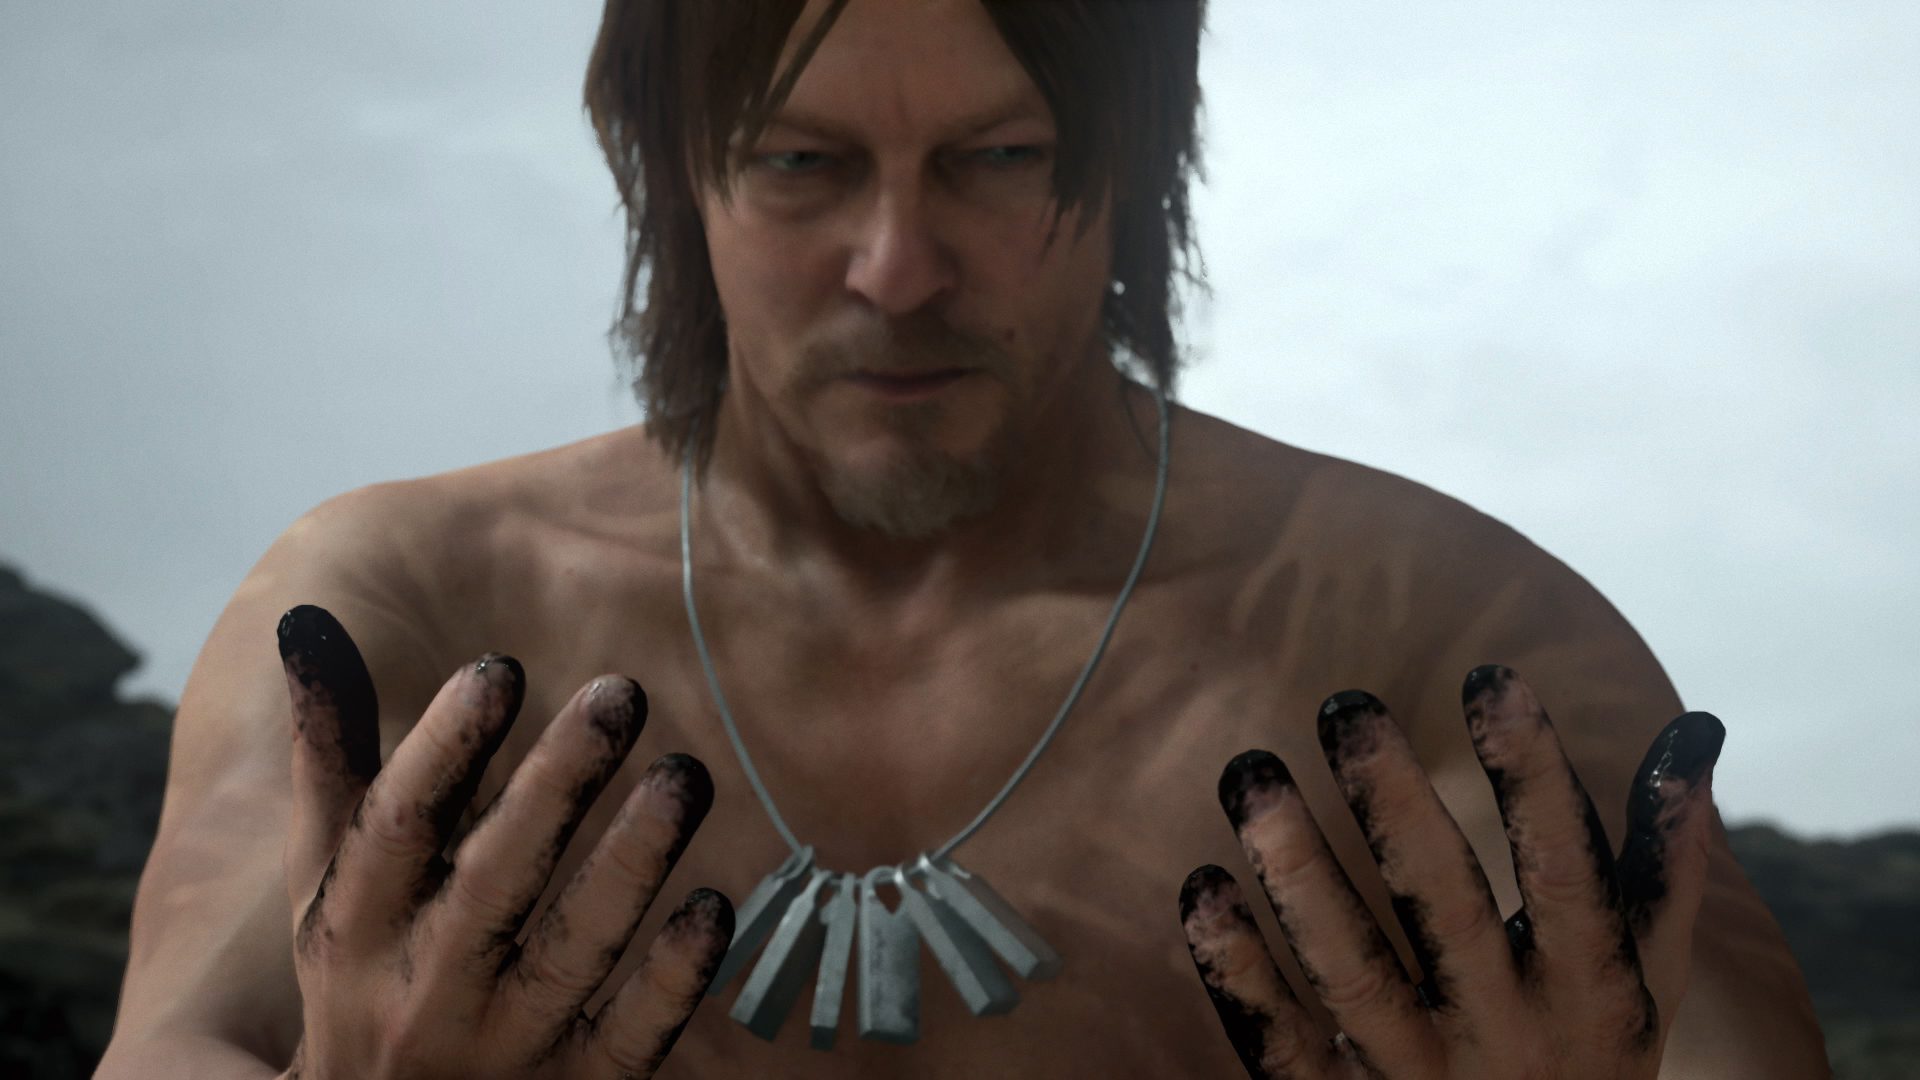 Norman Reedus Glad You Can’t Peek At His Pecker While Playing Death Stranding